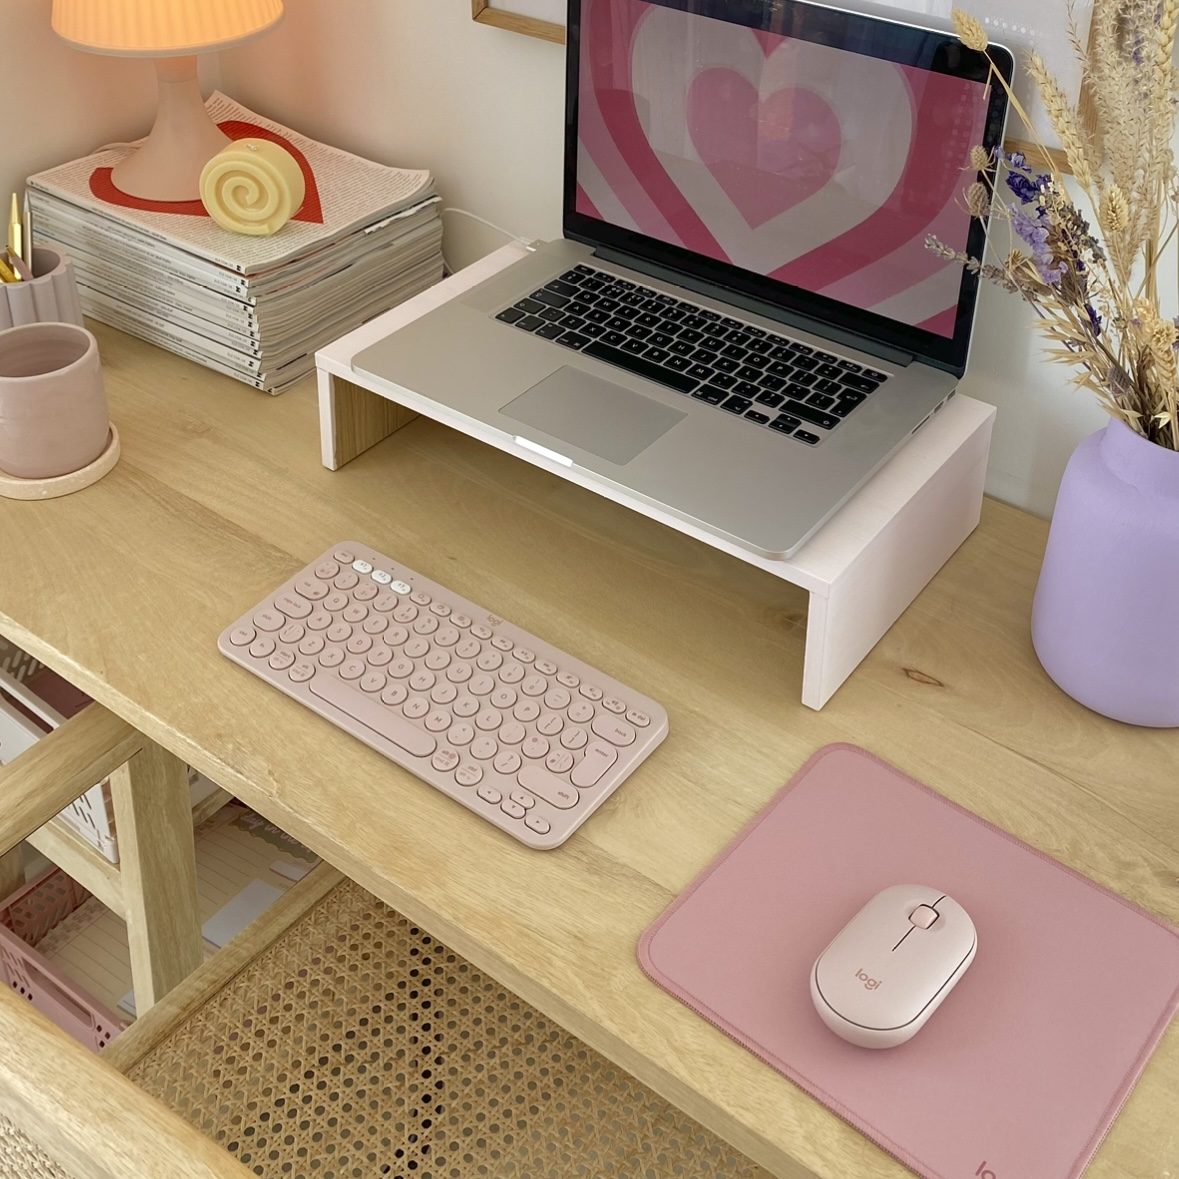 Desk set up that features a pink mouse and keyboard.